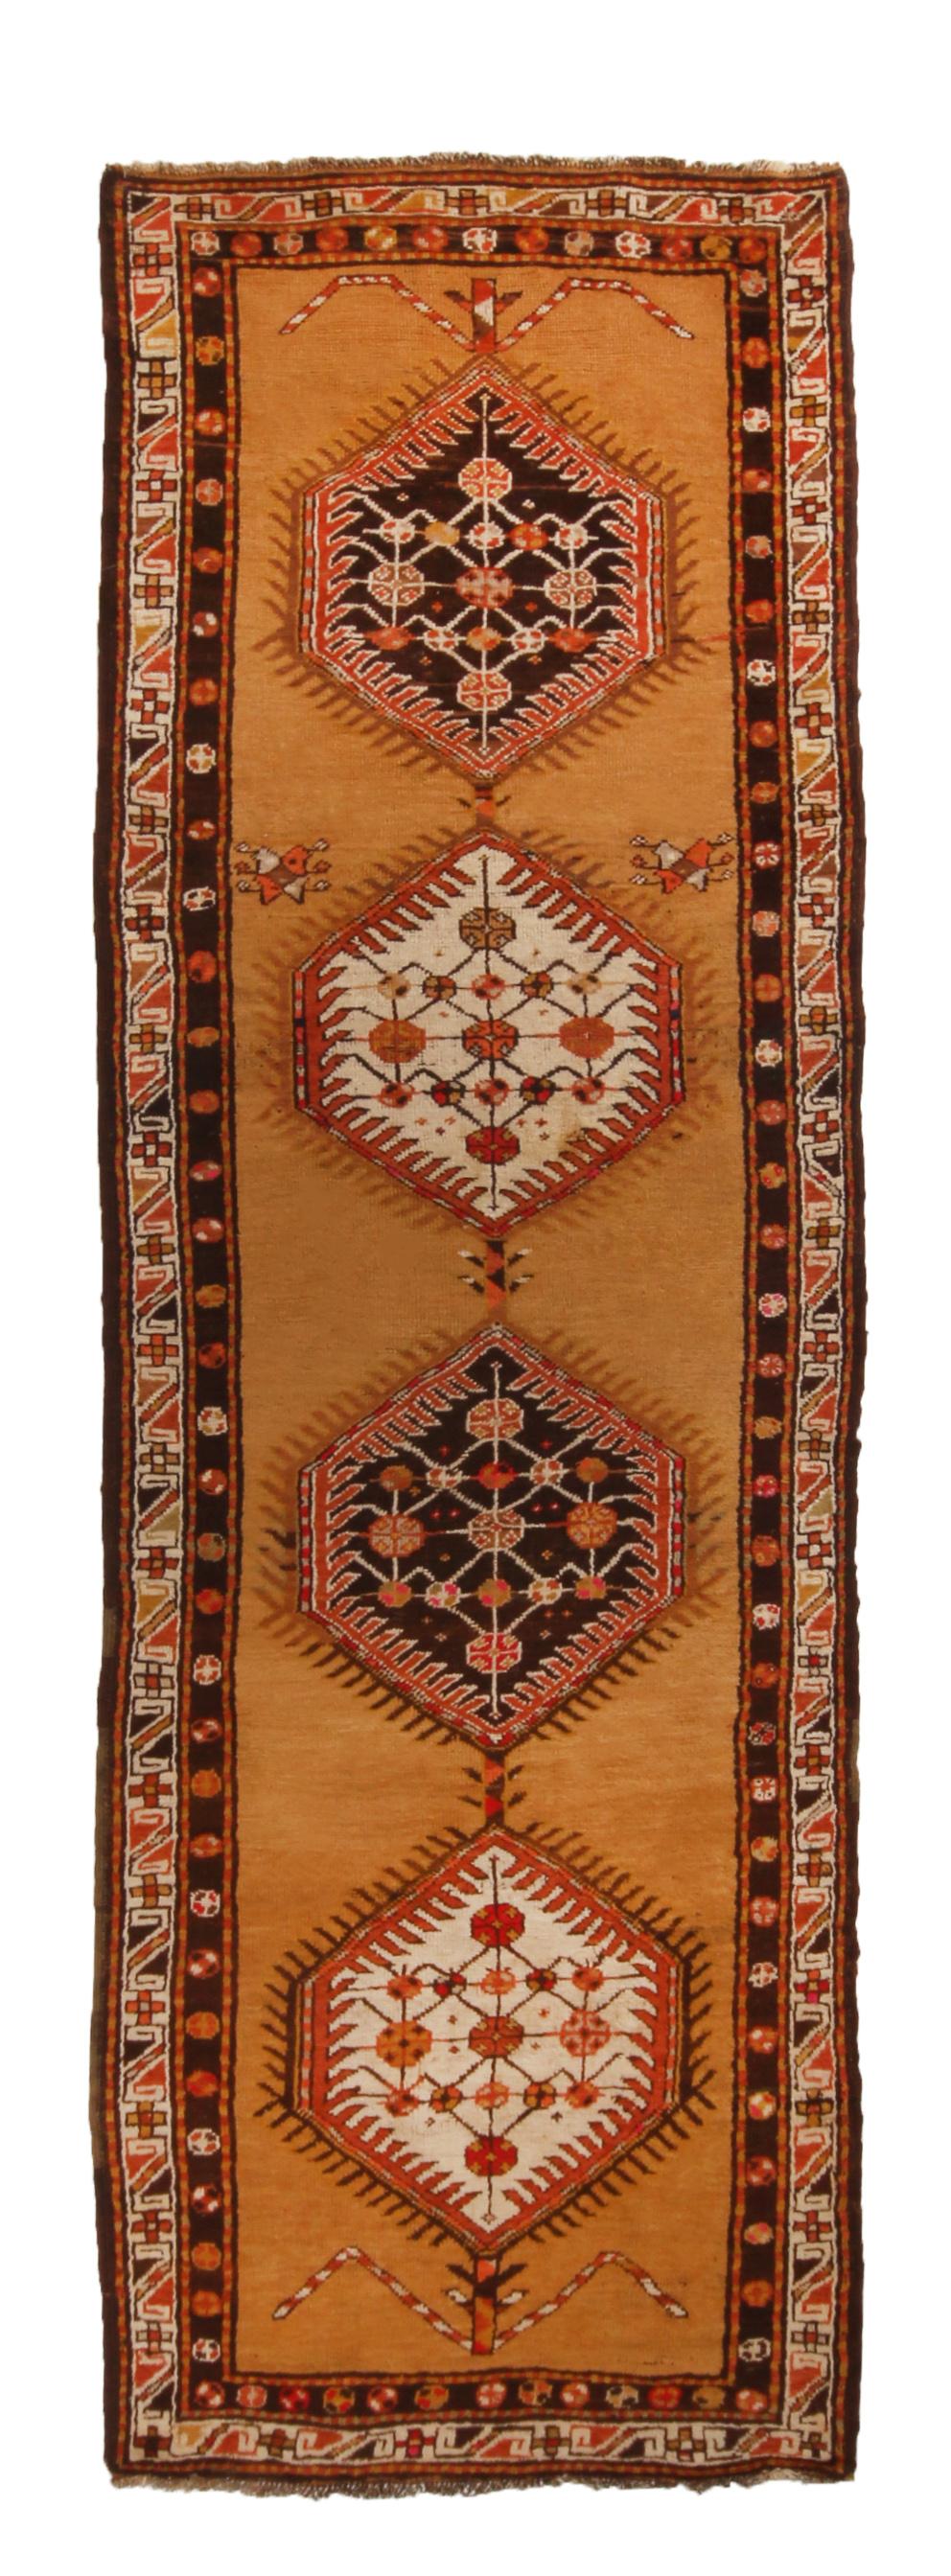 Originating from Persia in 1900, this antique Sarab runner enjoys a unique alternation of beige, red, and black colorway in its field medallions against a bright abrash copper-orange background. Hand knotted in high quality wool, it is unique to see